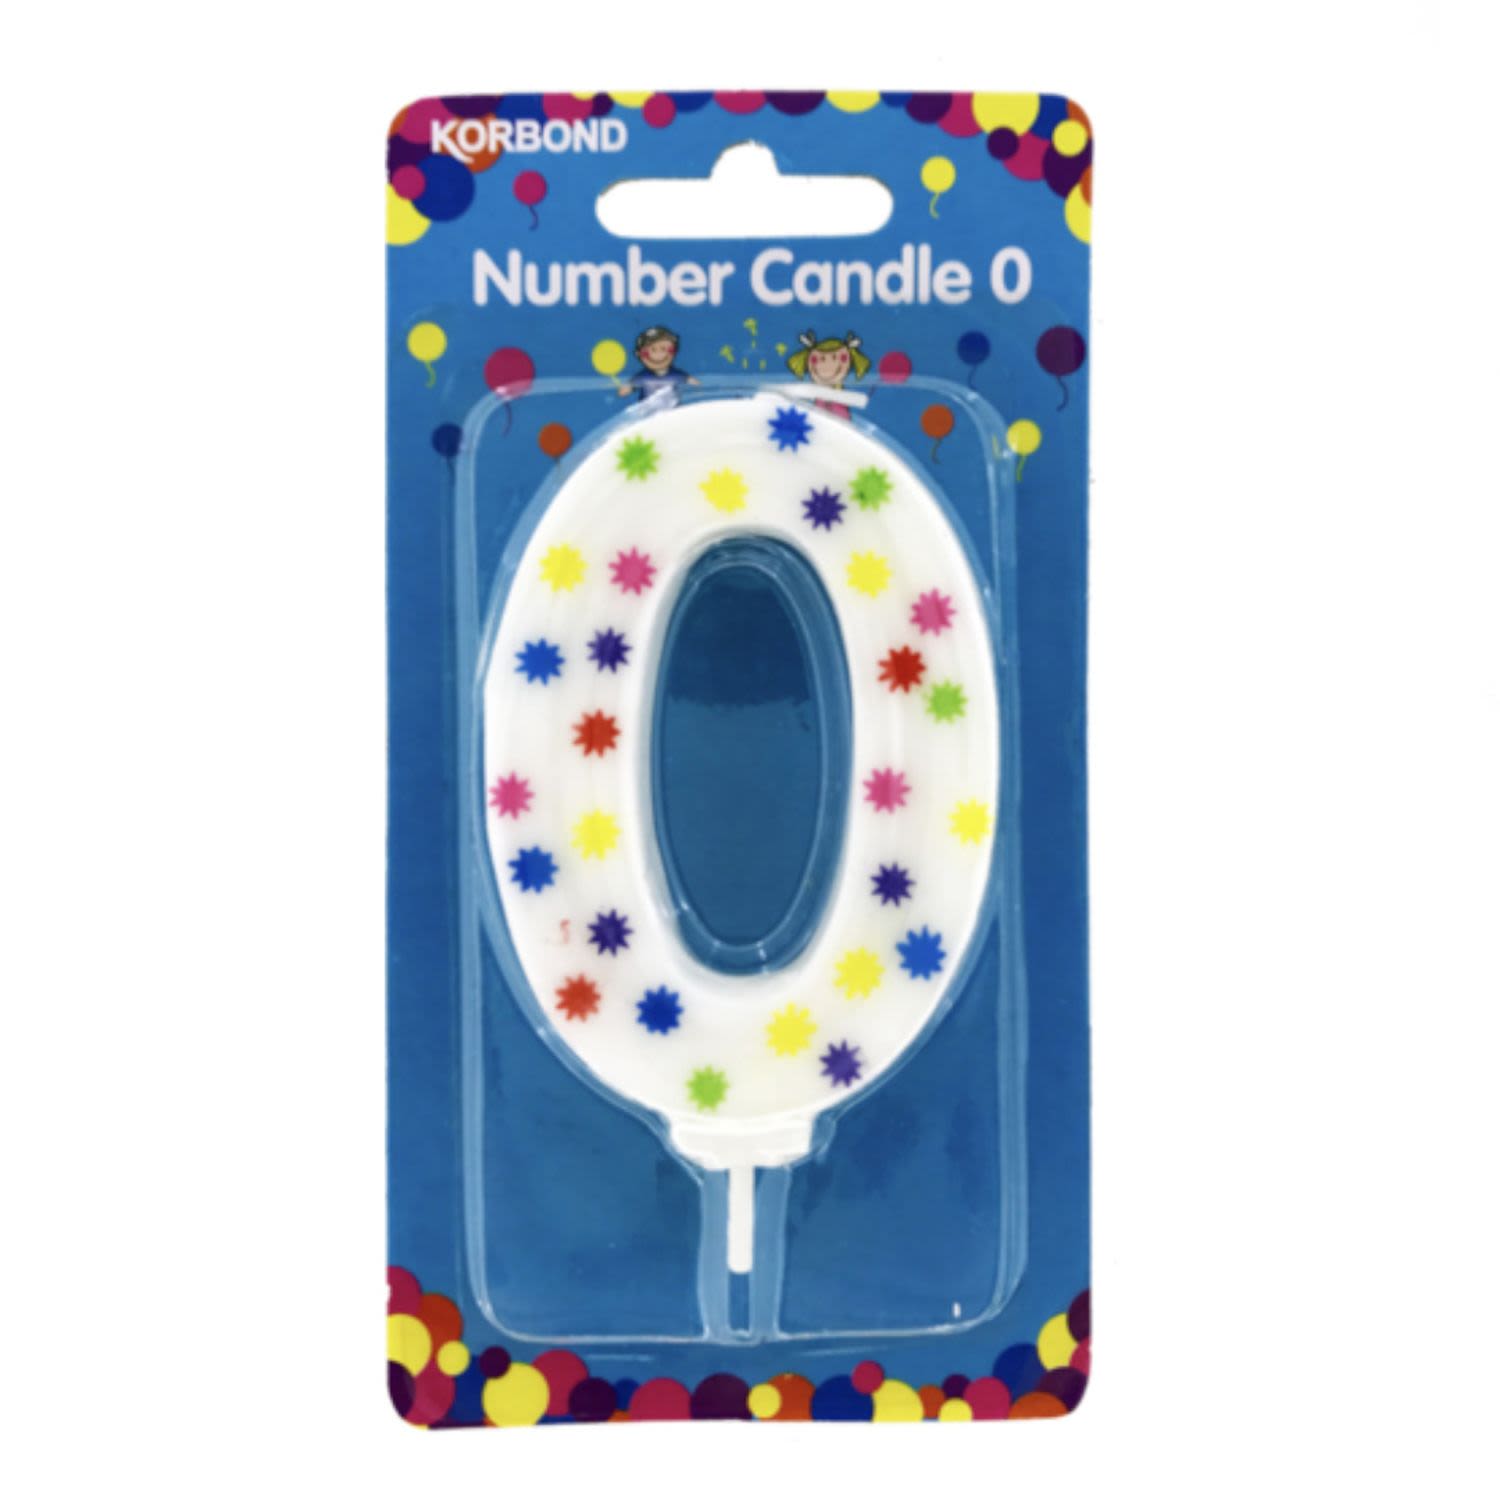 Korbond Birthday Candle Number 0, 1 Each